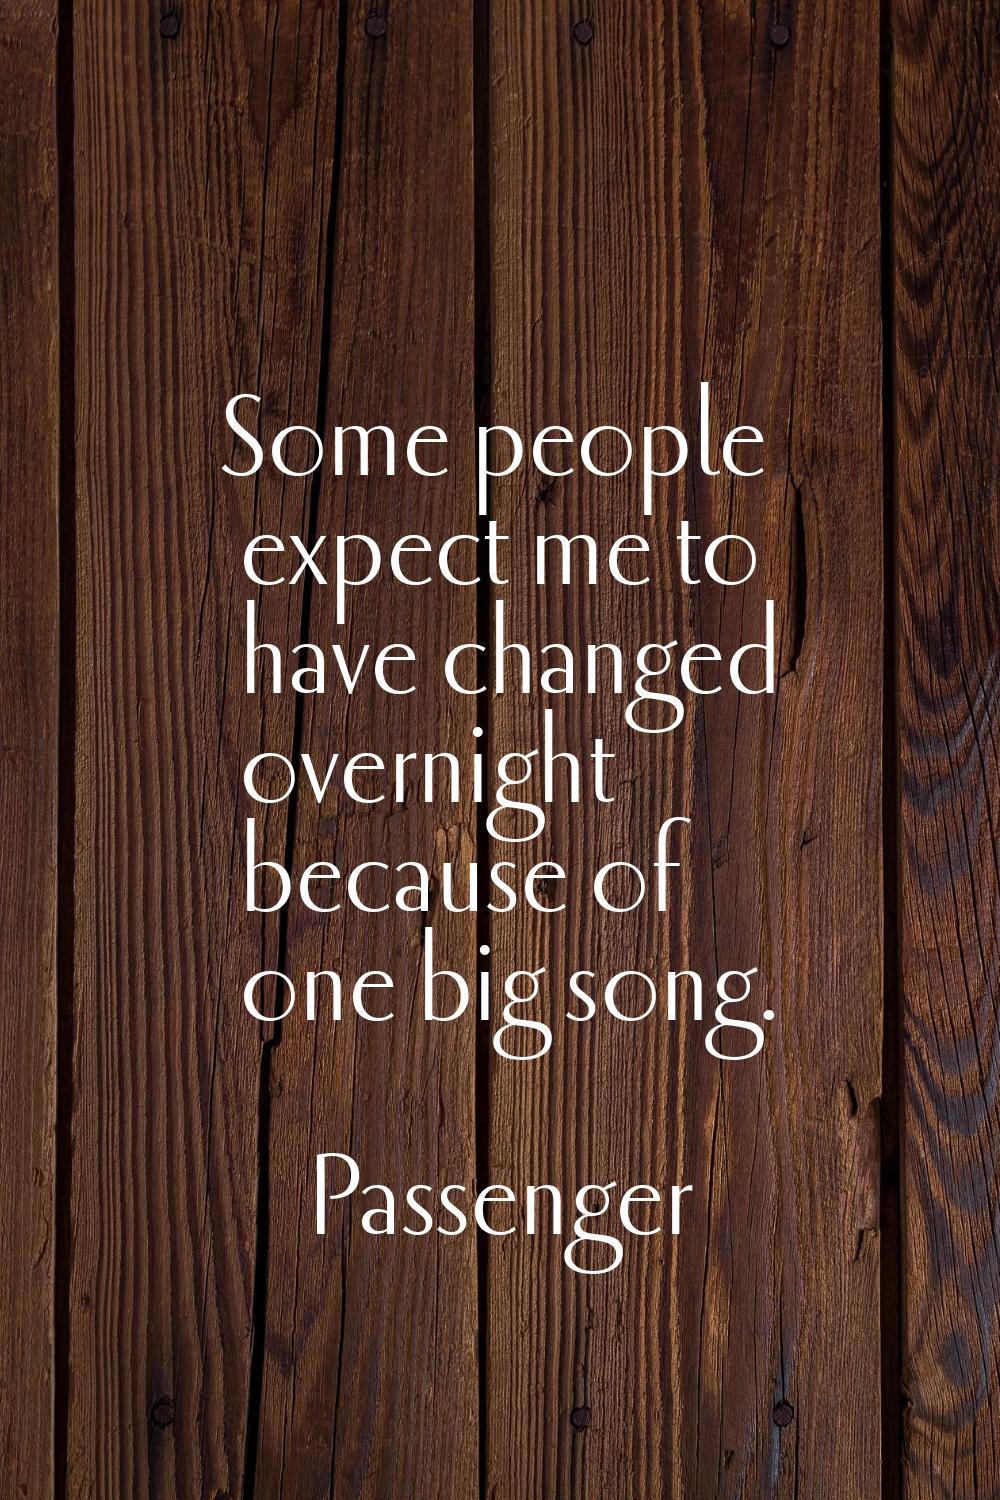 Some people expect me to have changed overnight because of one big song.